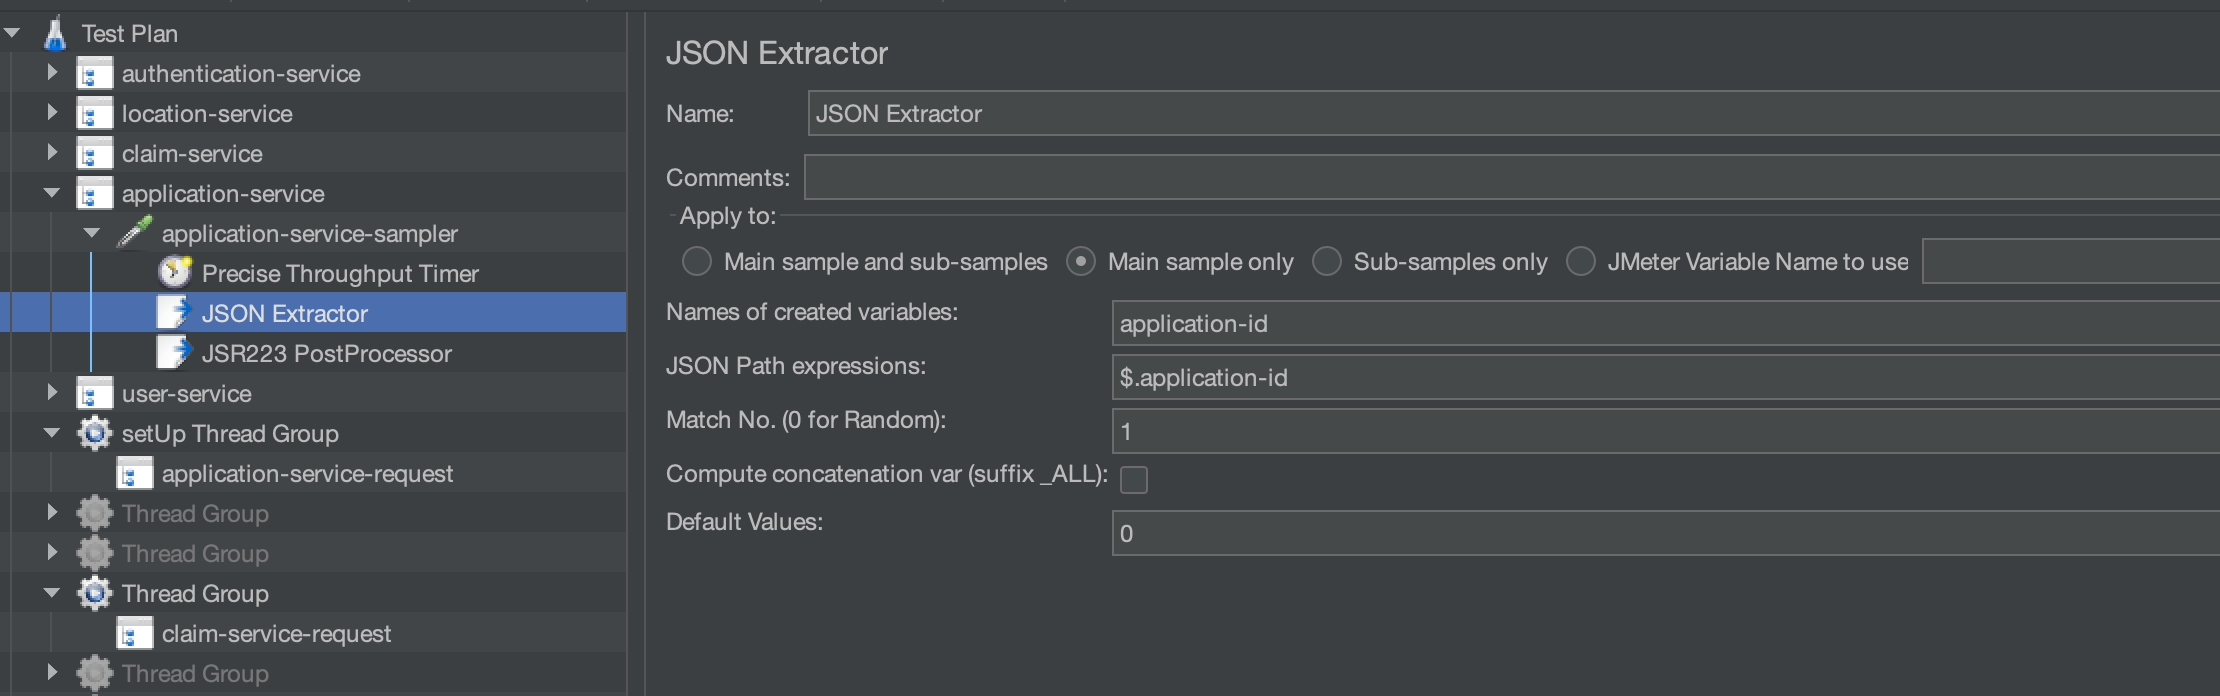 json-extractor